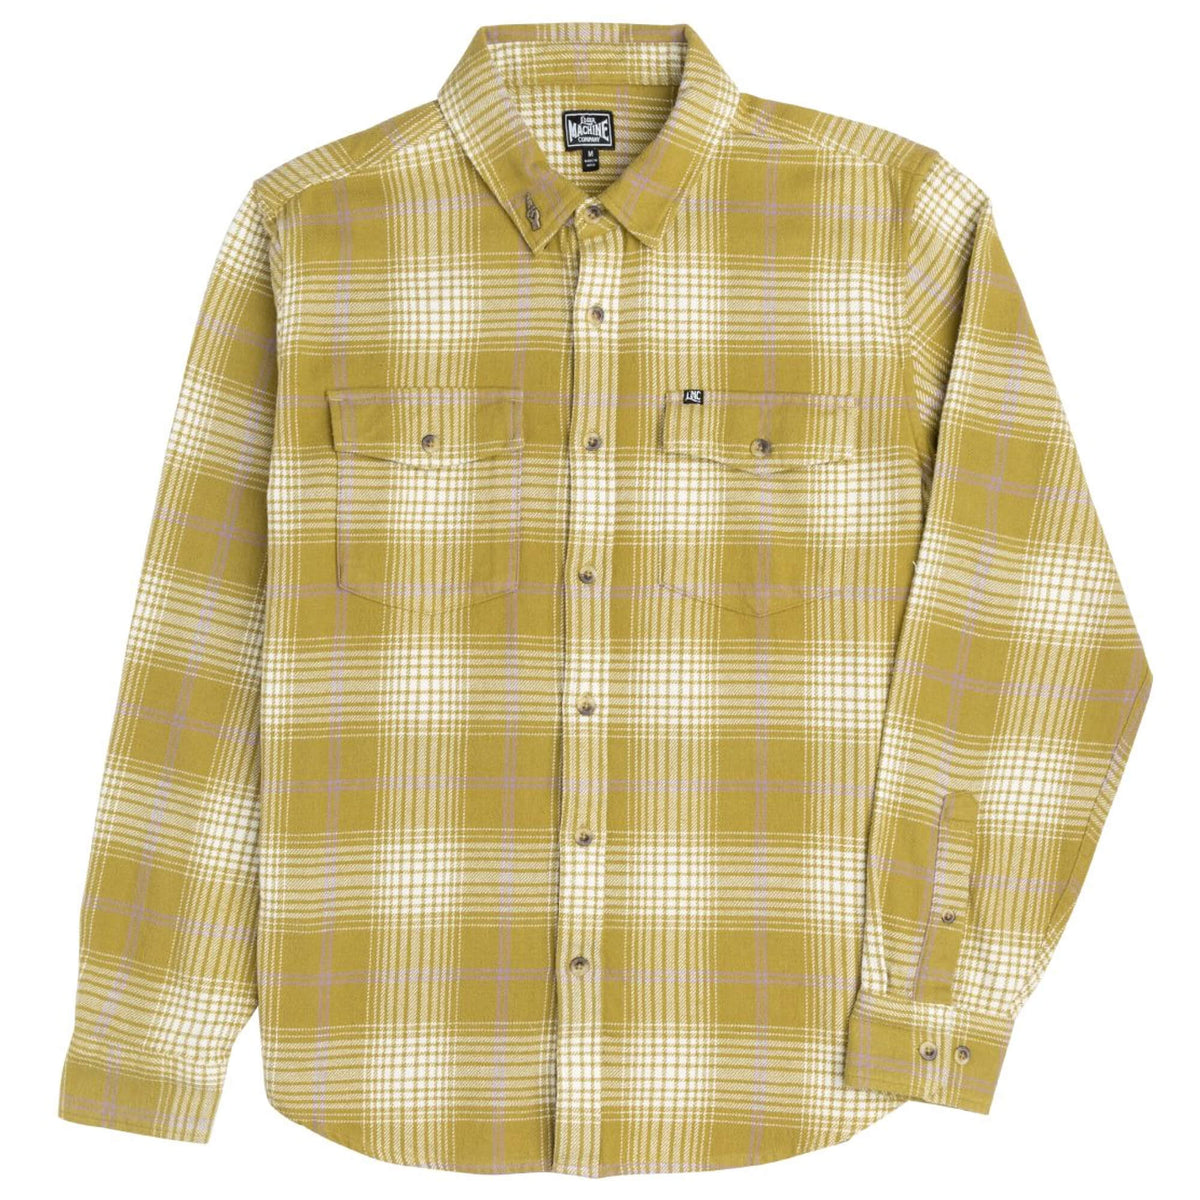 Loser Machine Hovley Woven Shirt Willow White